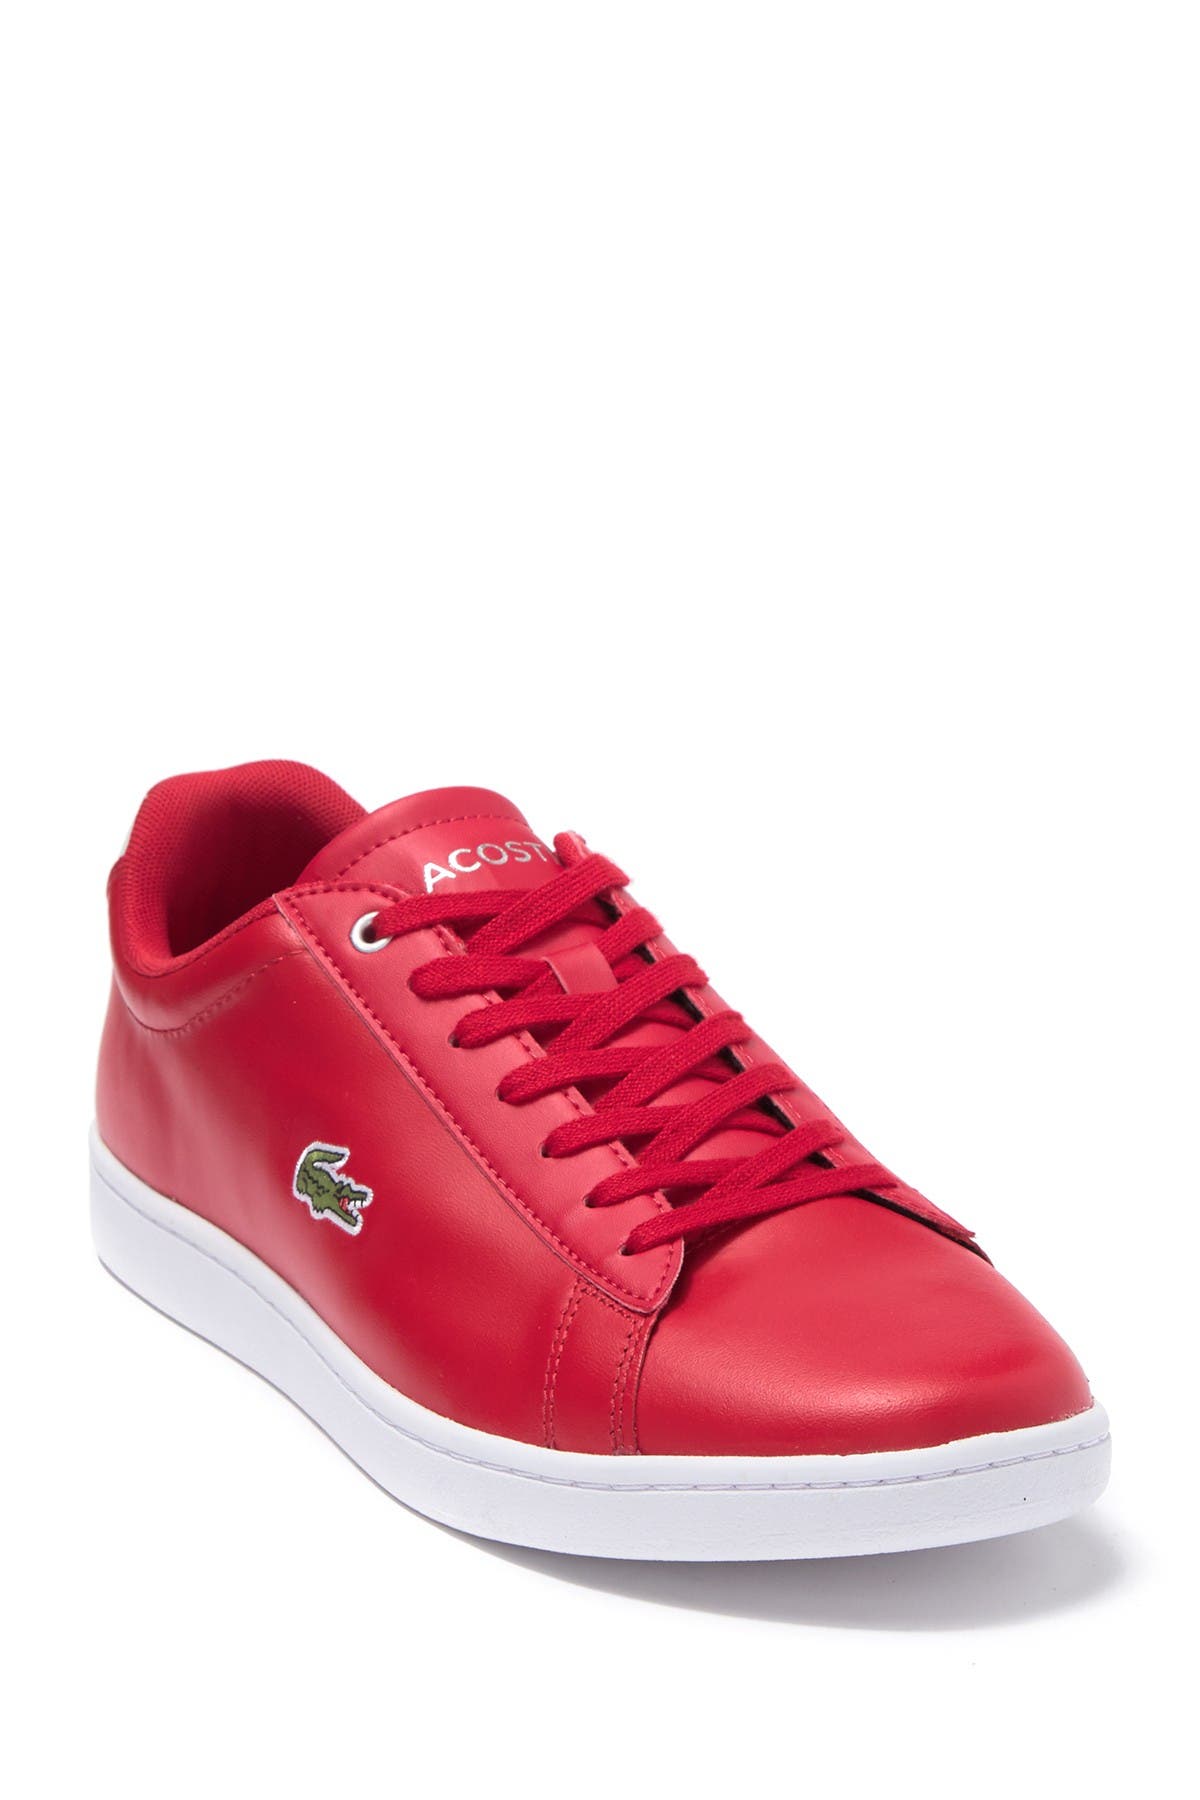 Lacoste | Hydez 319 Leather Sneaker 